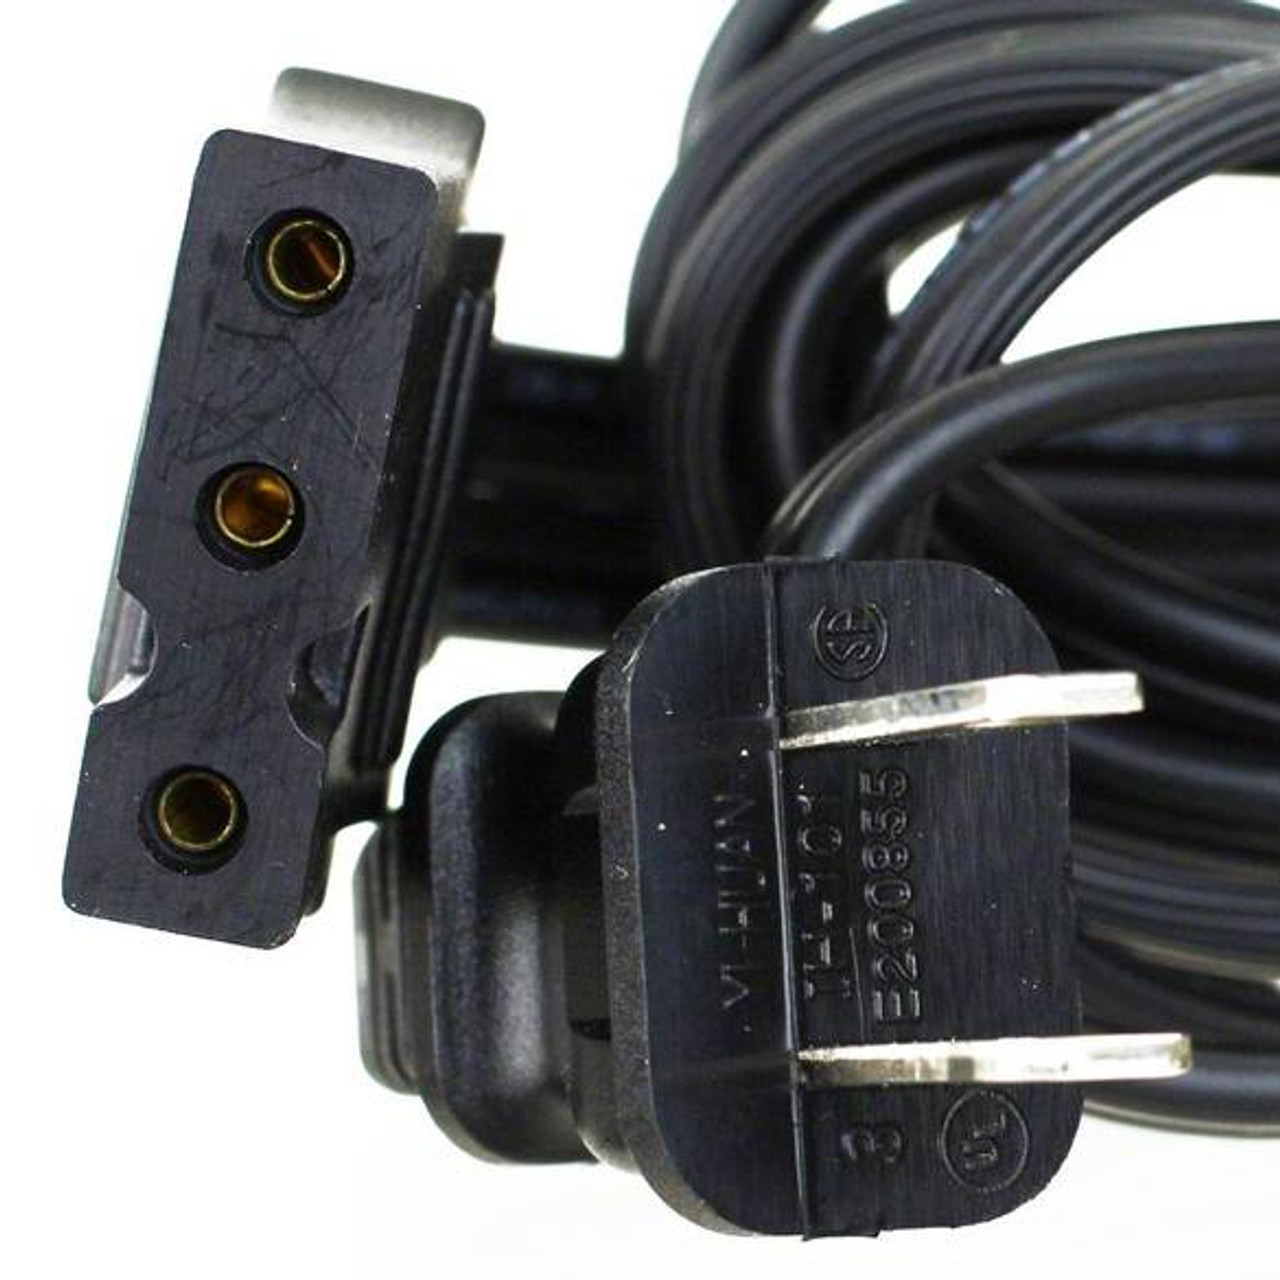 Foot Control &/or 5 Prong Cord for Singer Sewing Machines & More